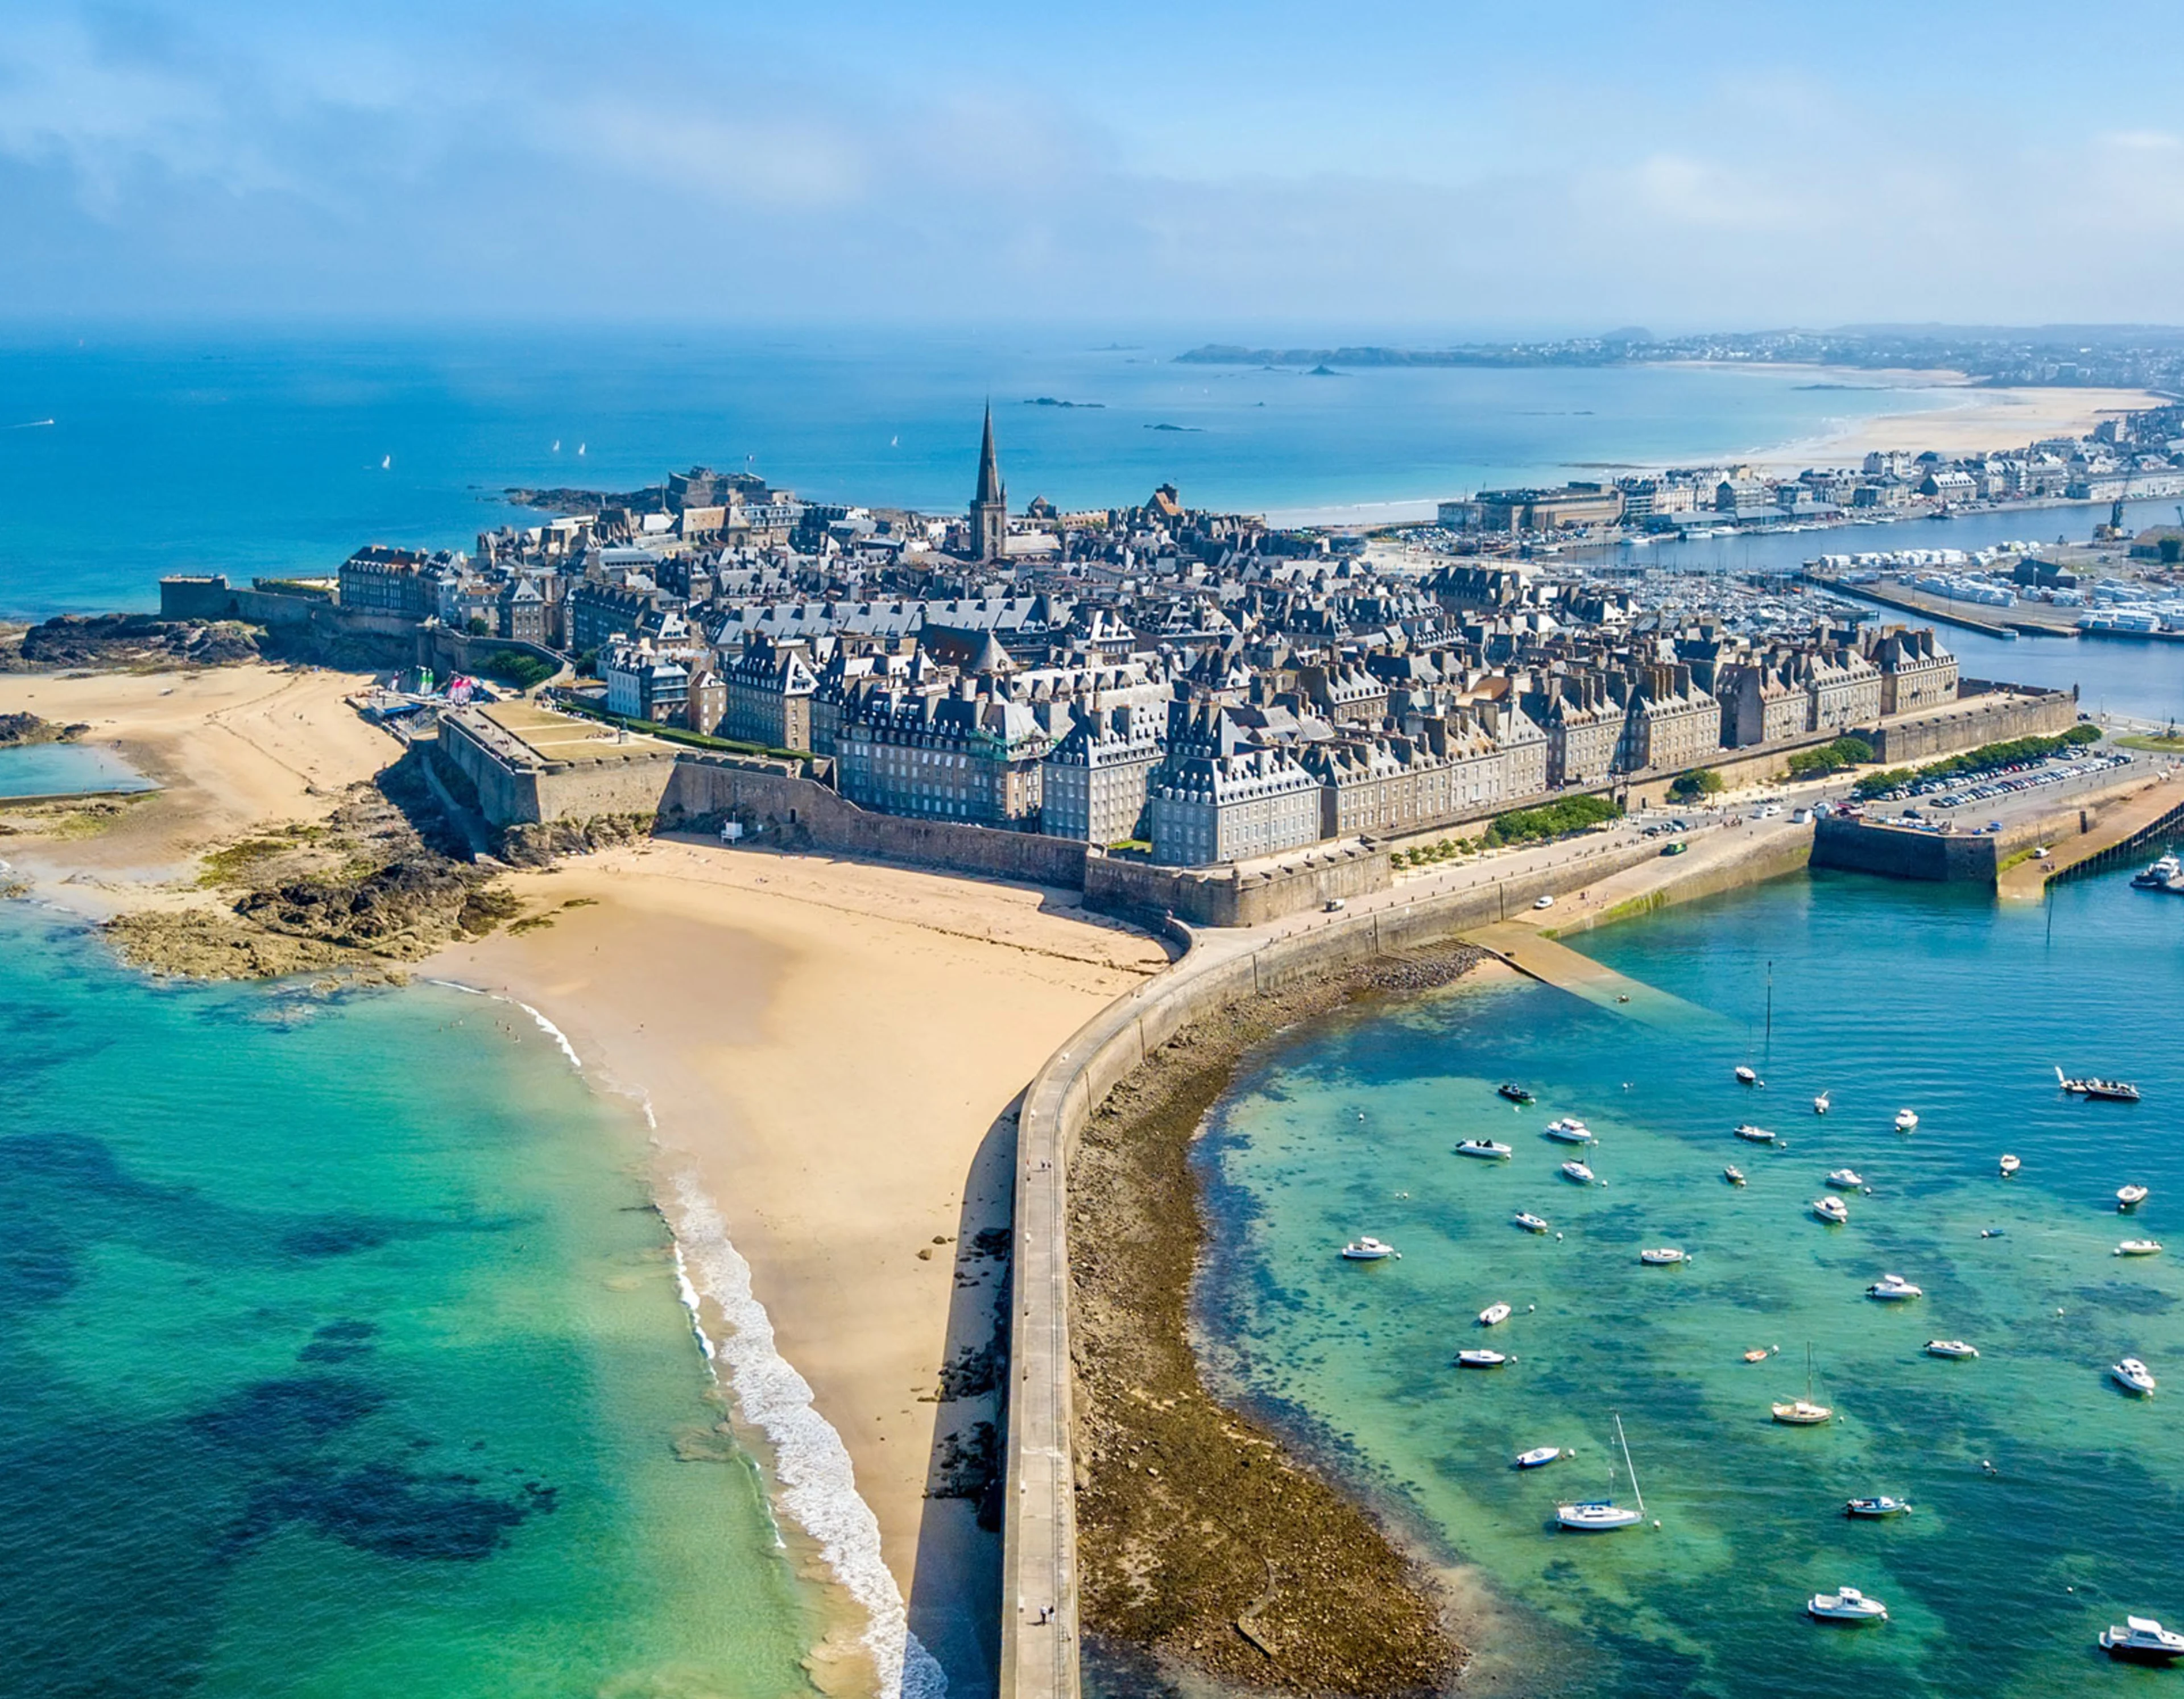 Saint Malo, France, from above. Old city surrounded by white beaches and blue water.